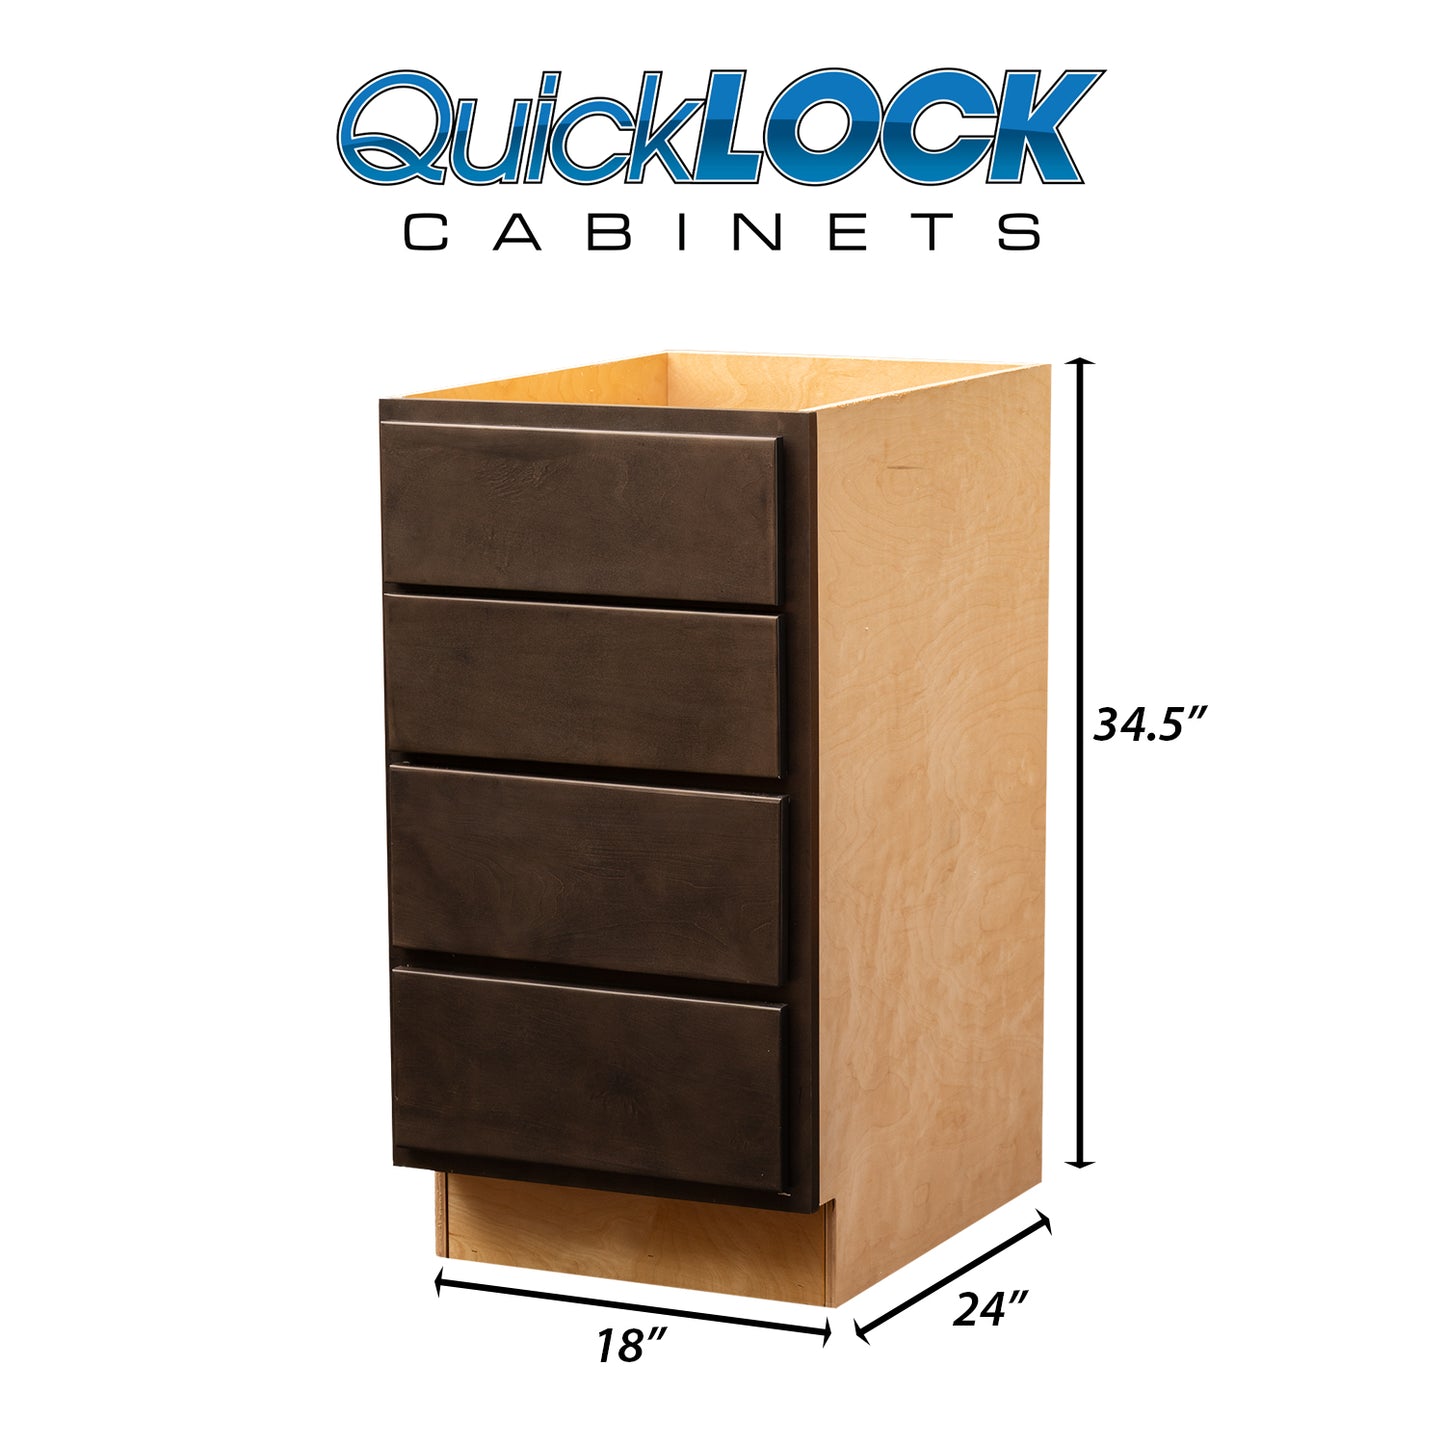 Quicklock RTA (Ready-to-Assemble) Espresso Stain 4 Drawer 18" Base Cabinet | 18"Wx34.5"Hx24"D